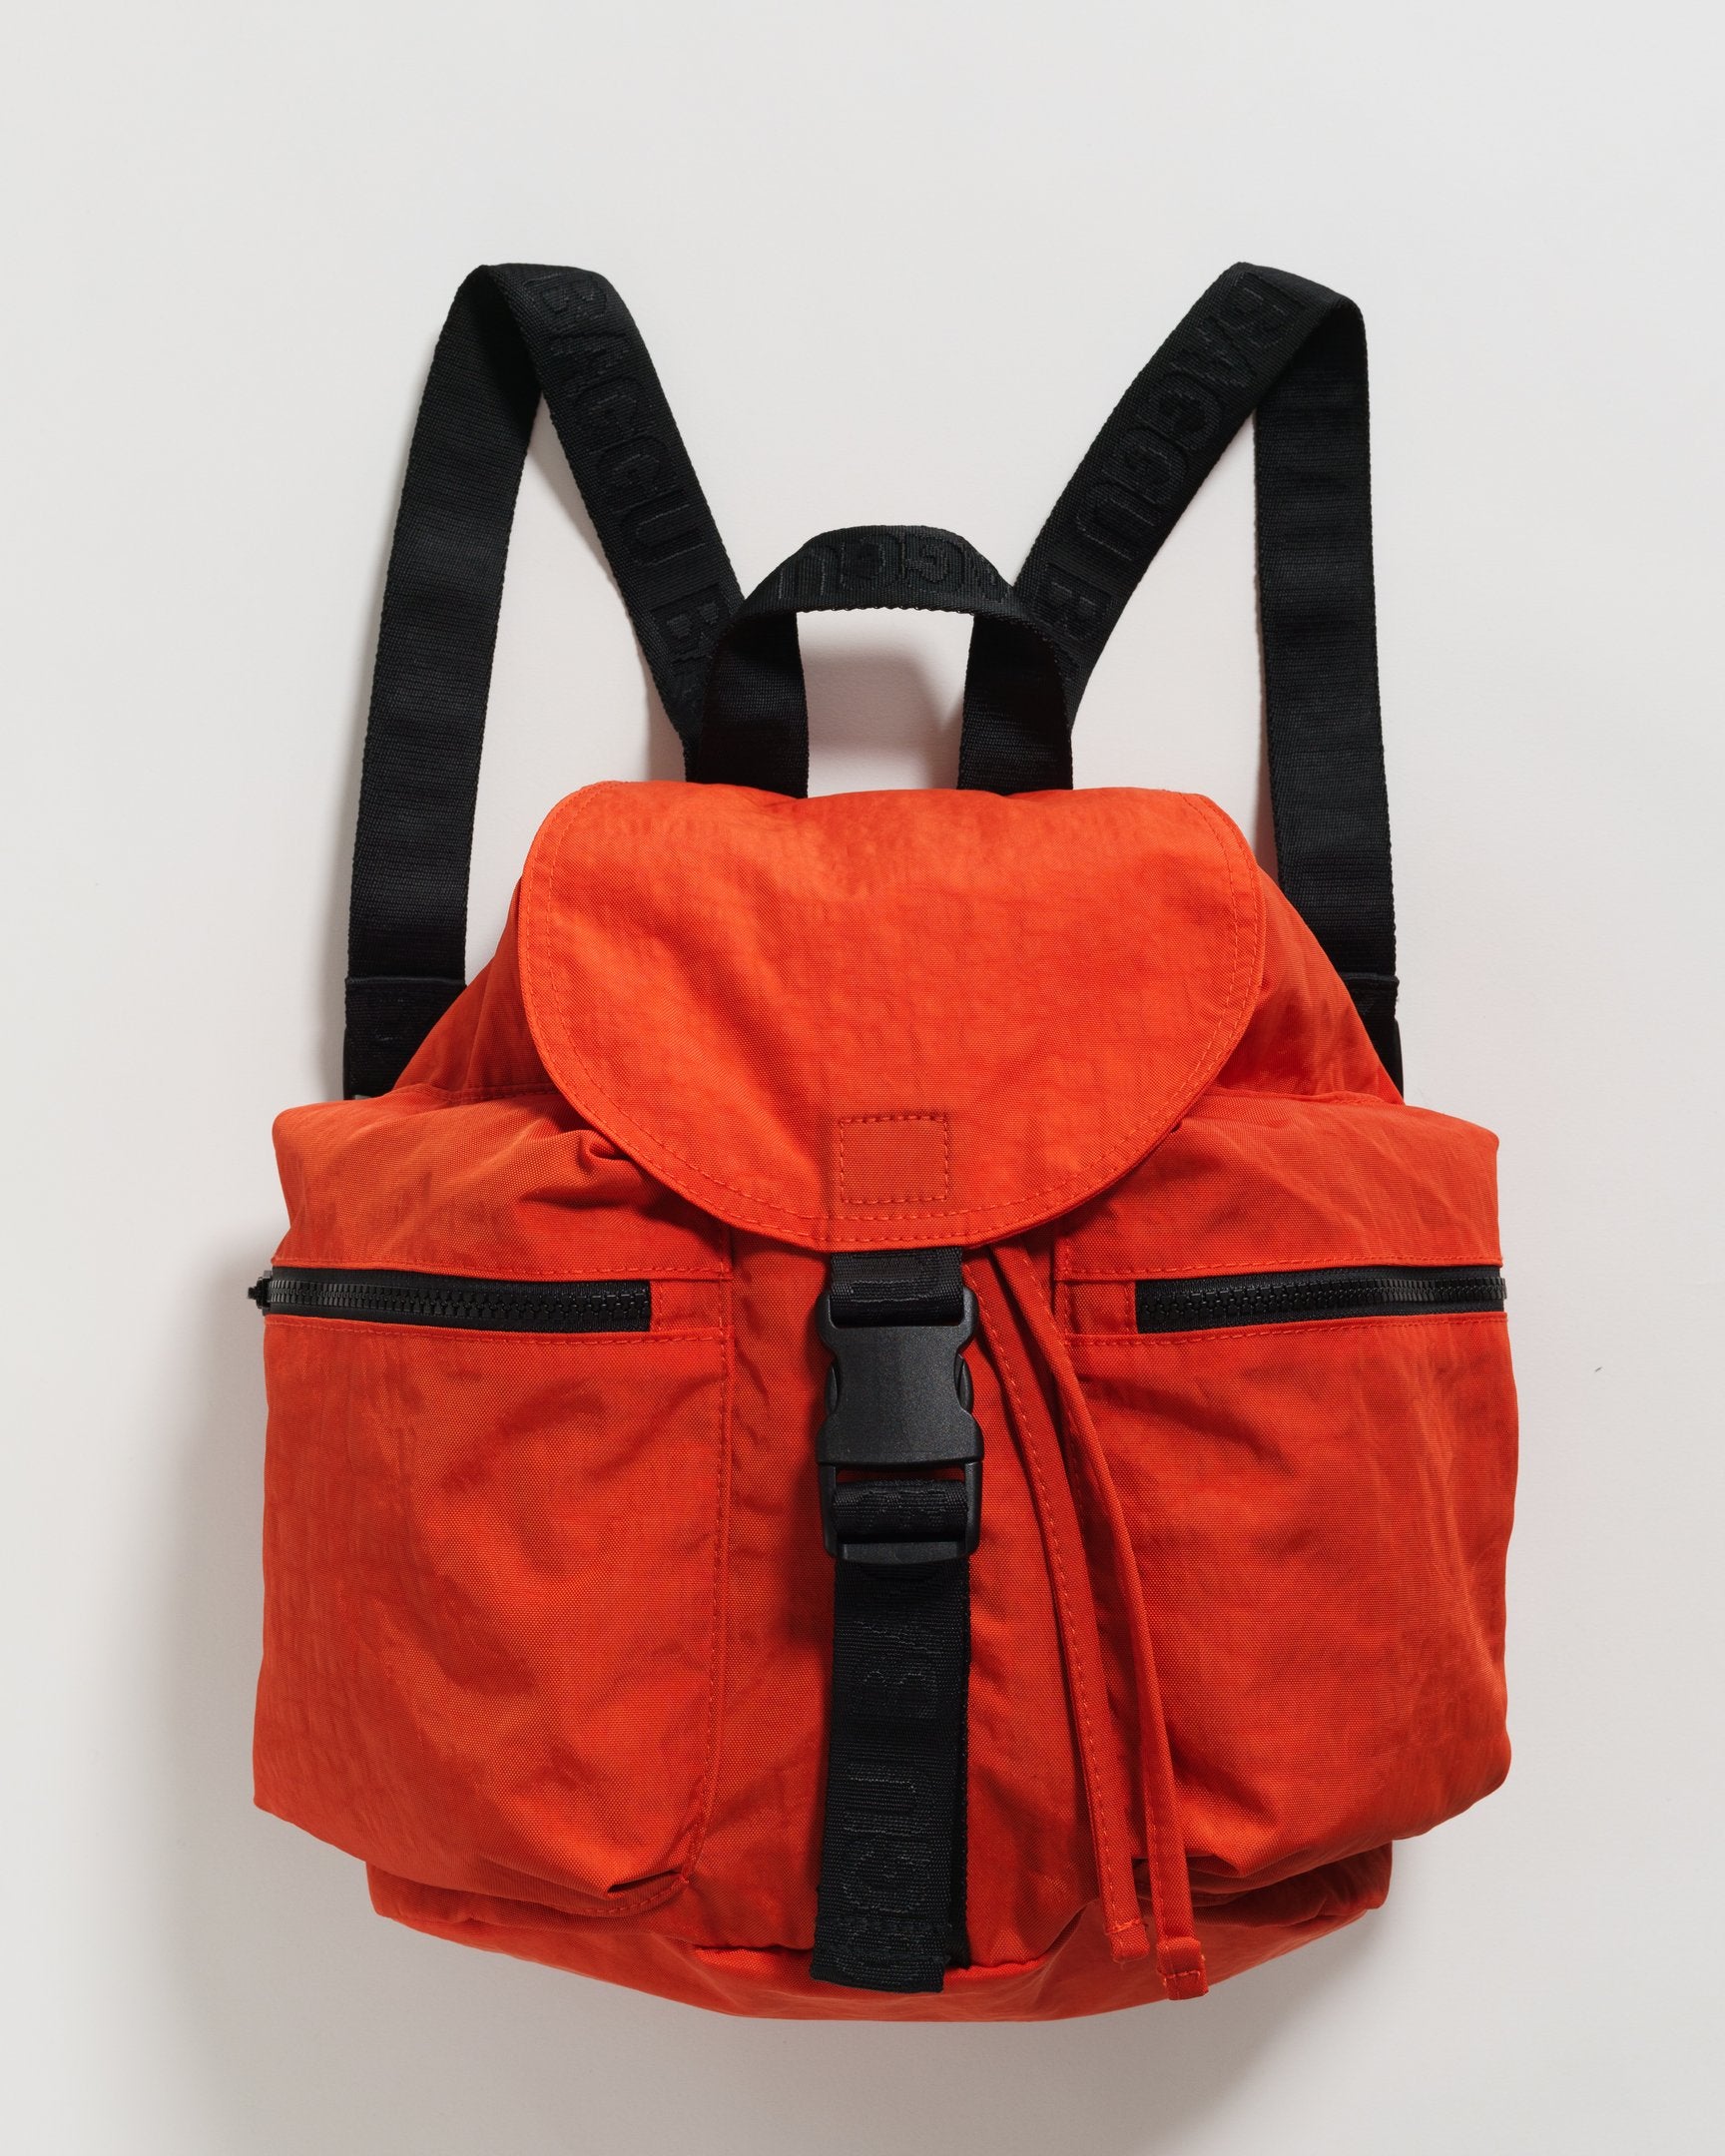 Baggu Small Sport Backpack - Tomato – The Village Soccer Shop